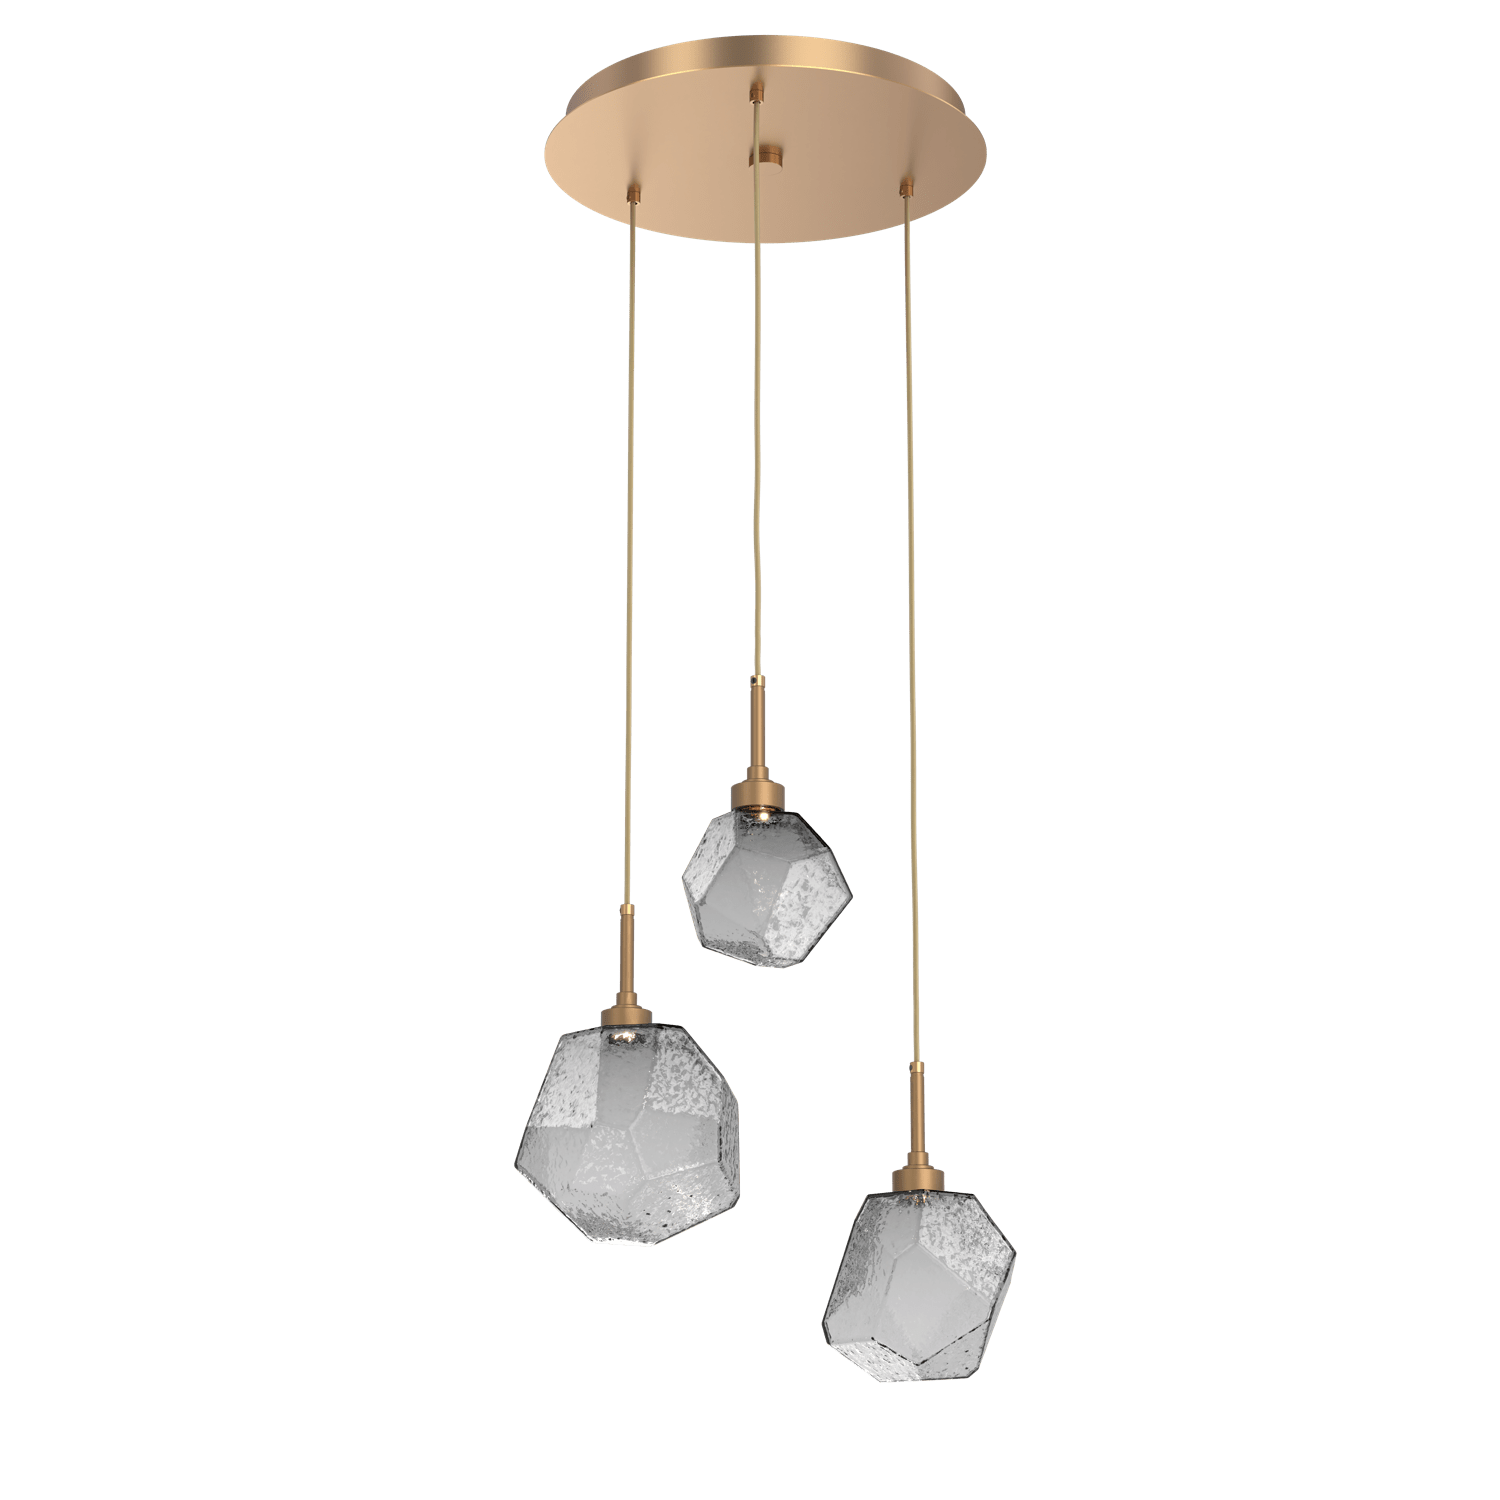 CHB0039-03-NB-S-Hammerton-Studio-Gem-3-light-round-pendant-chandelier-with-novel-brass-finish-and-smoke-blown-glass-shades-and-LED-lamping